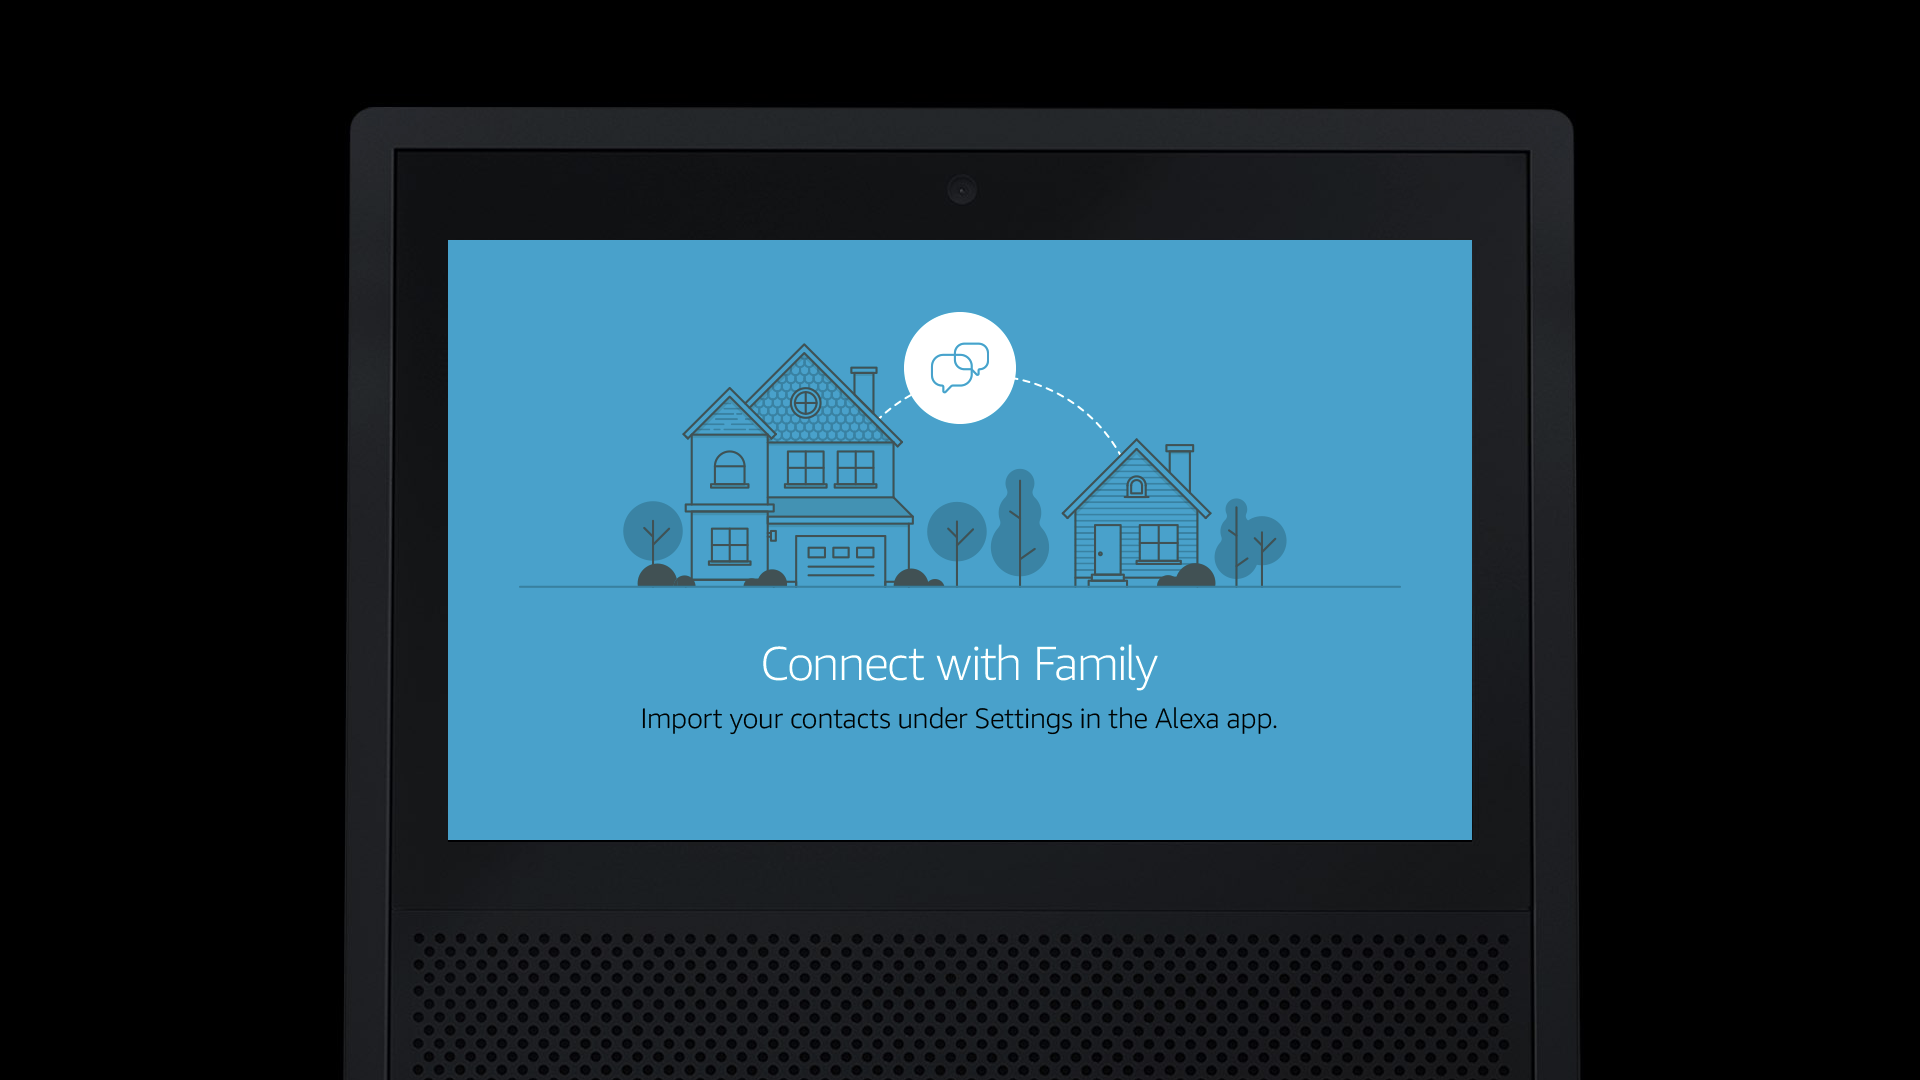 Image of Echo Show with an illustration inside the screen highlighting a feature of the device.